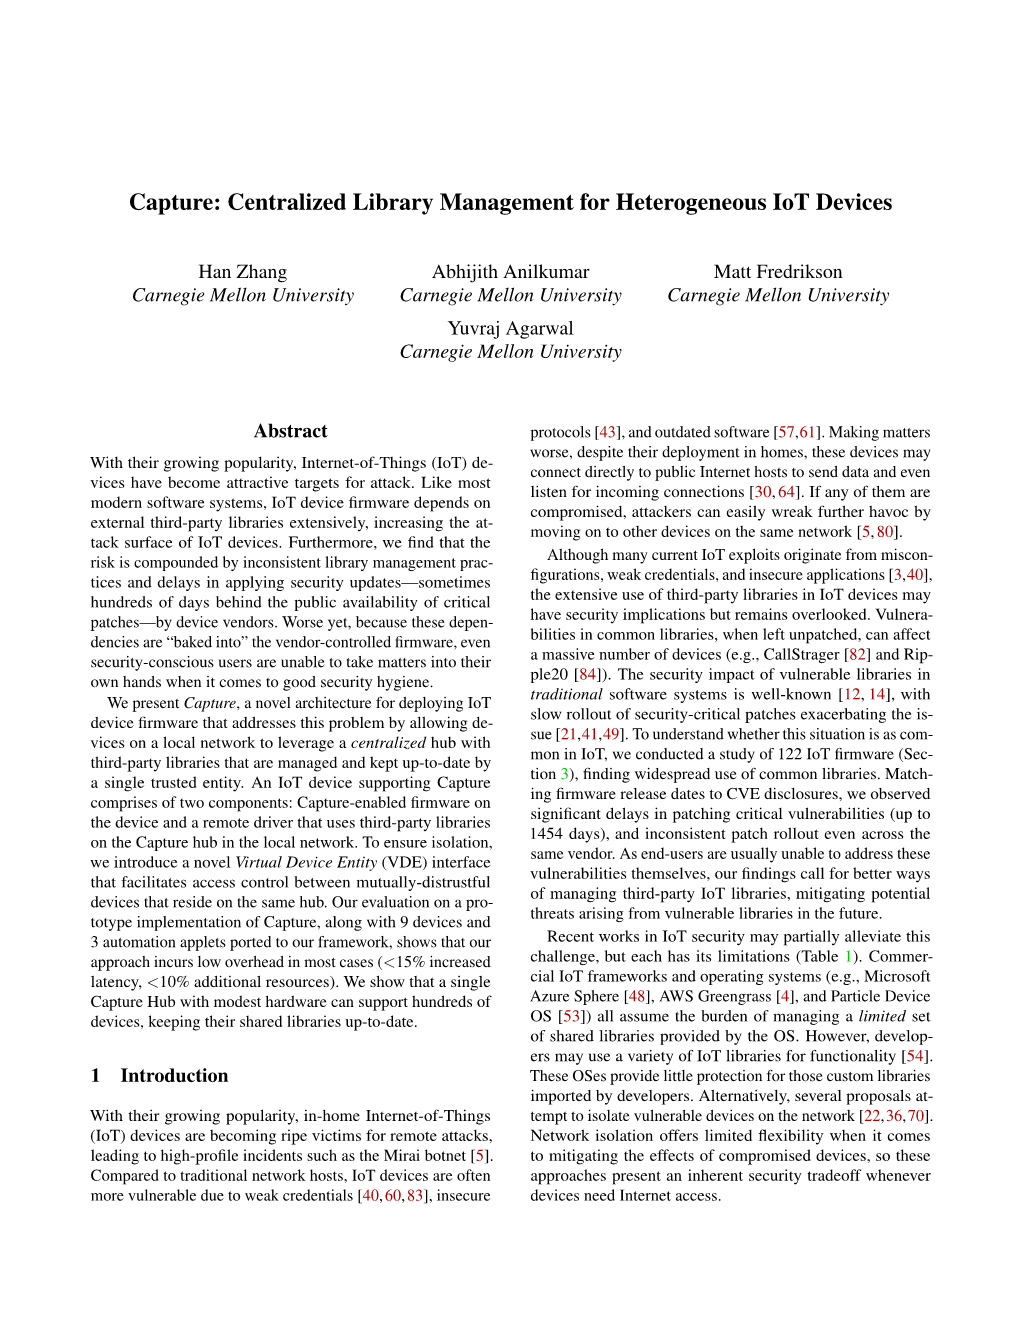 Centralized Library Management for Heterogeneous Iot Devices